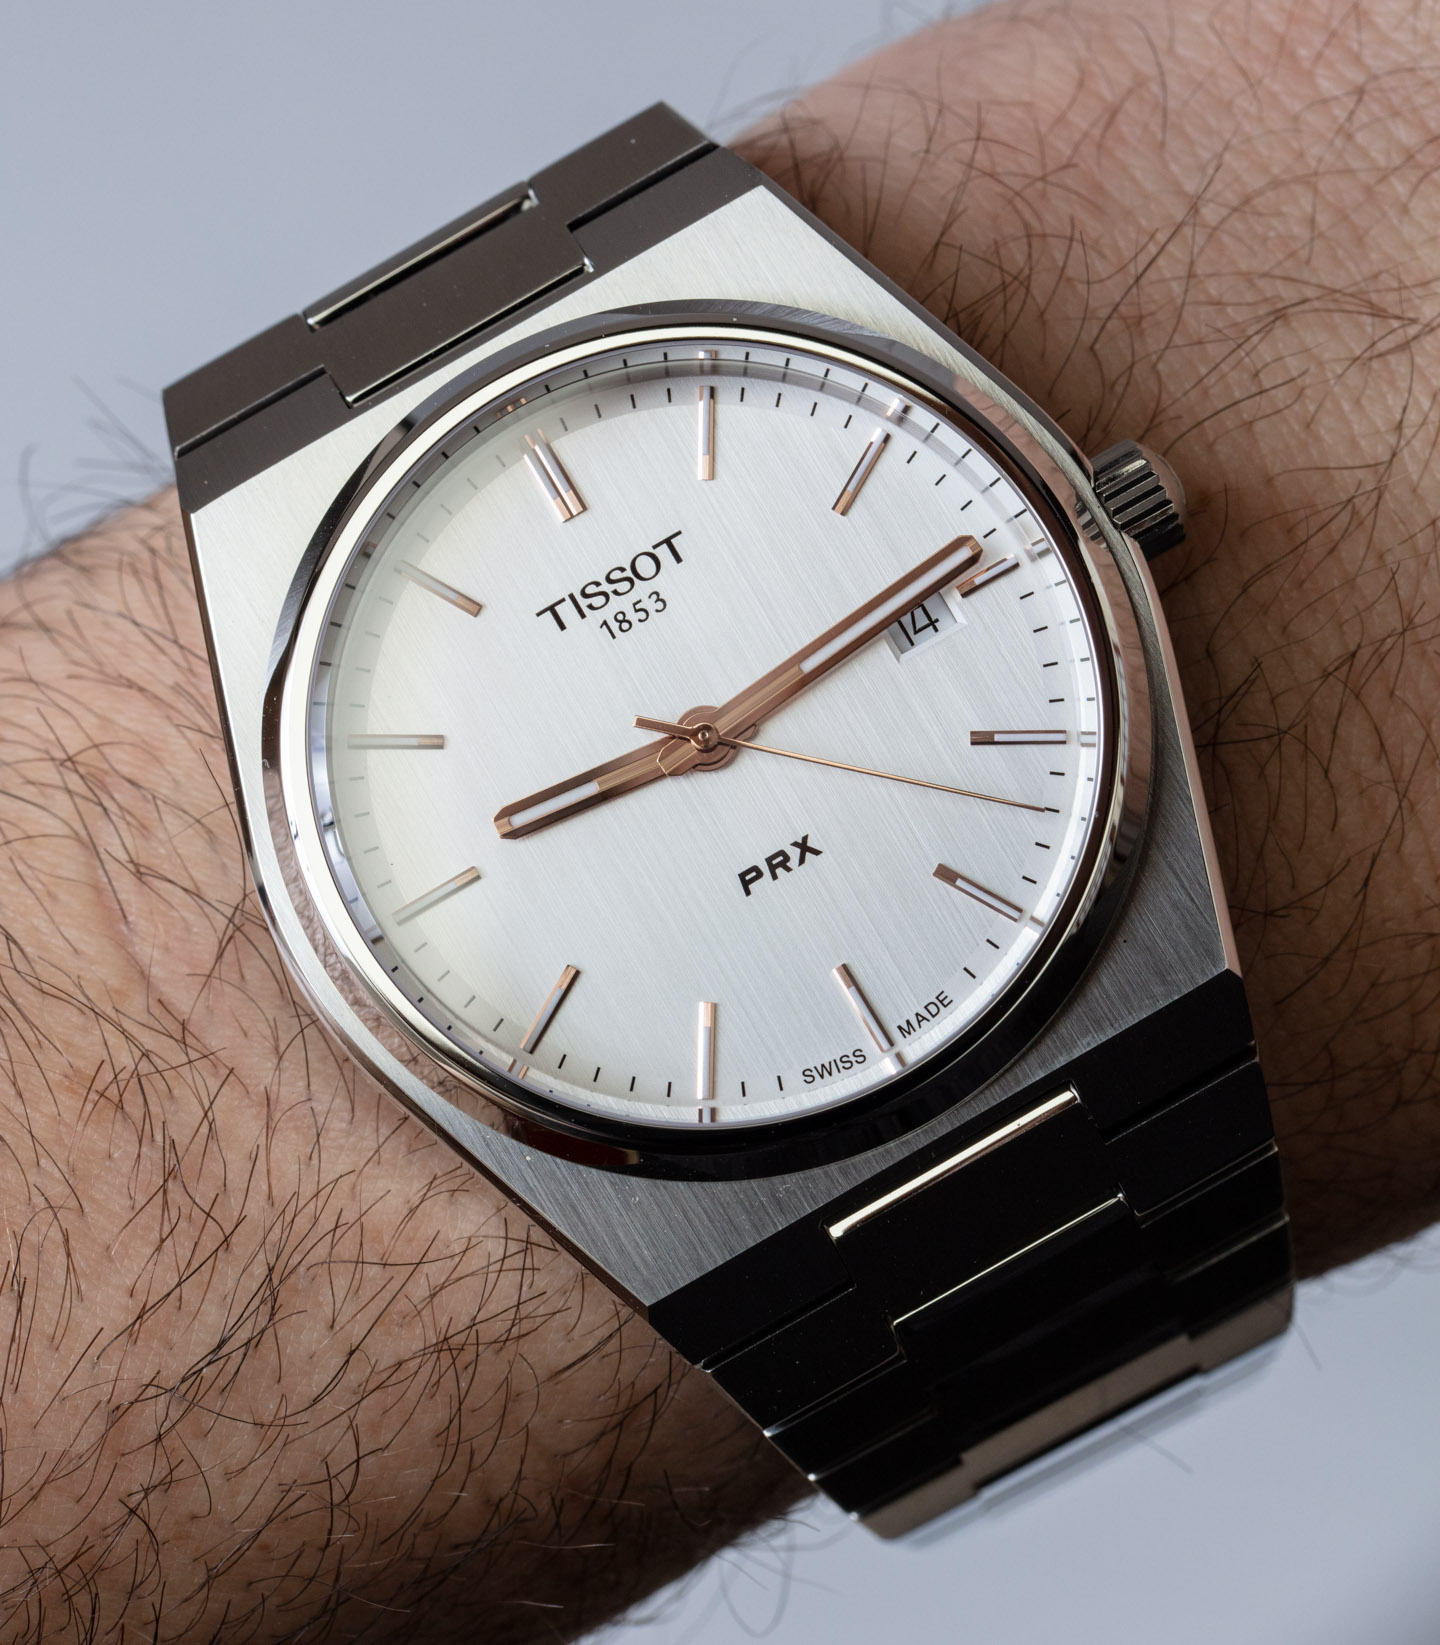 The Tissot PRX Review - An Impressive And Affordable Daily Watch!